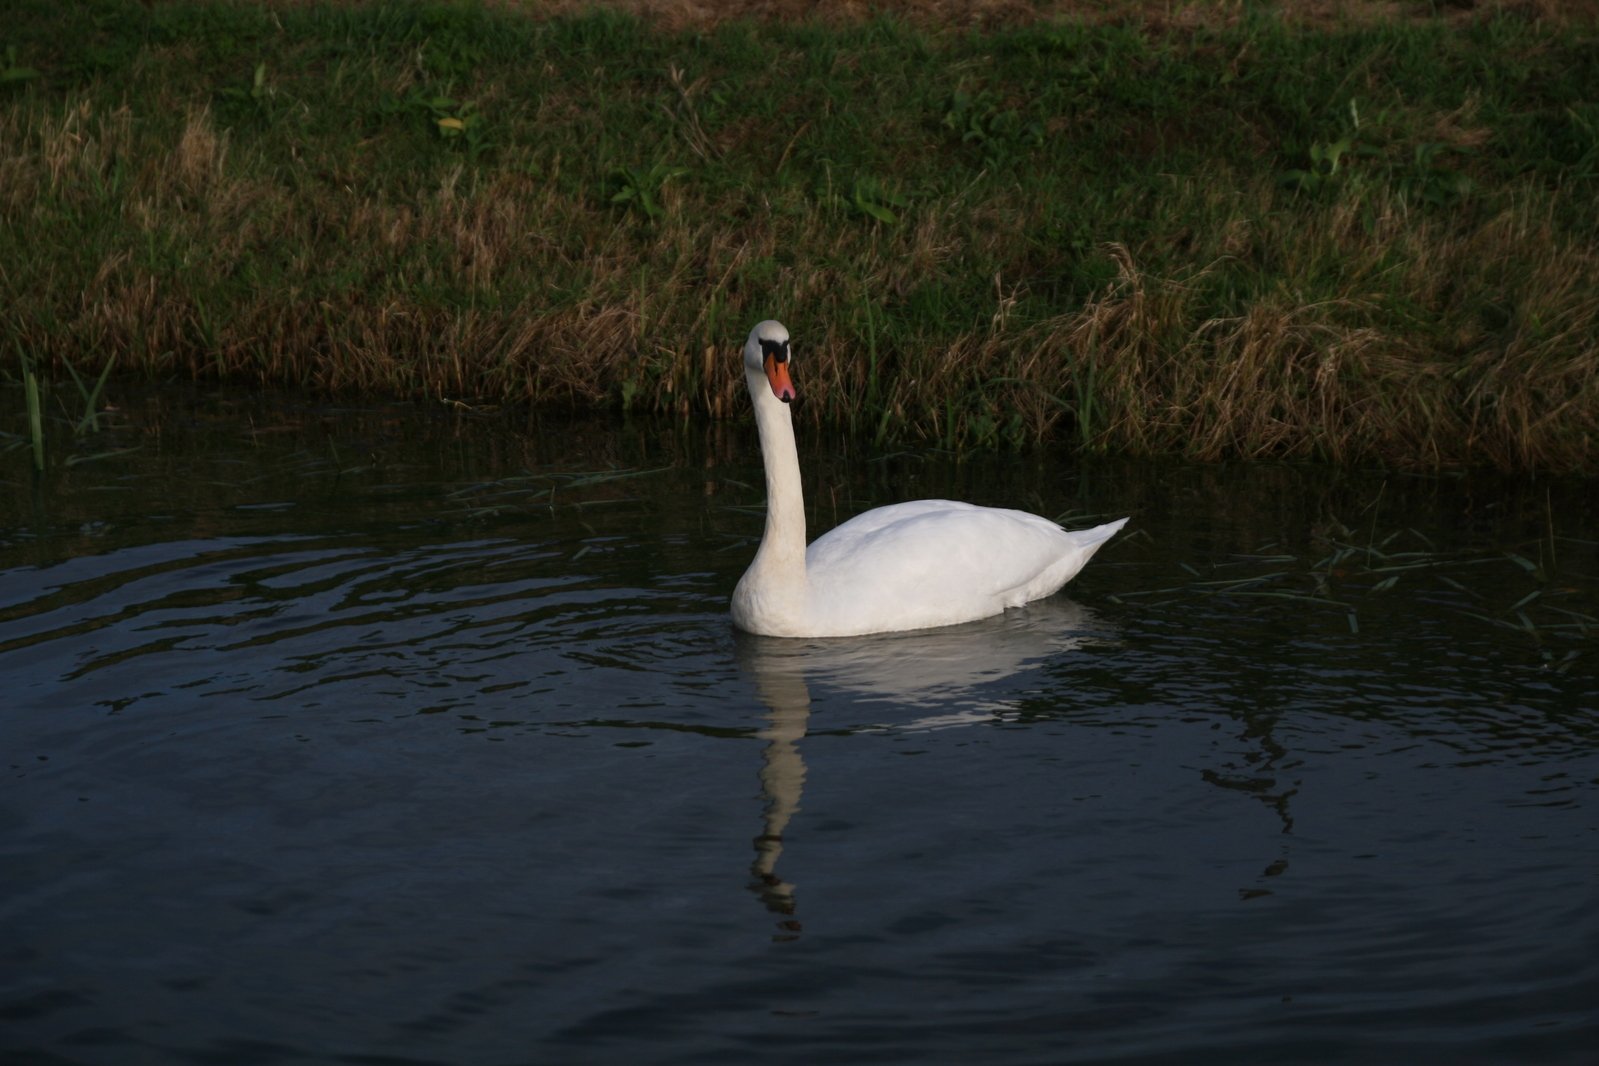 there is a swan that is swimming in the water